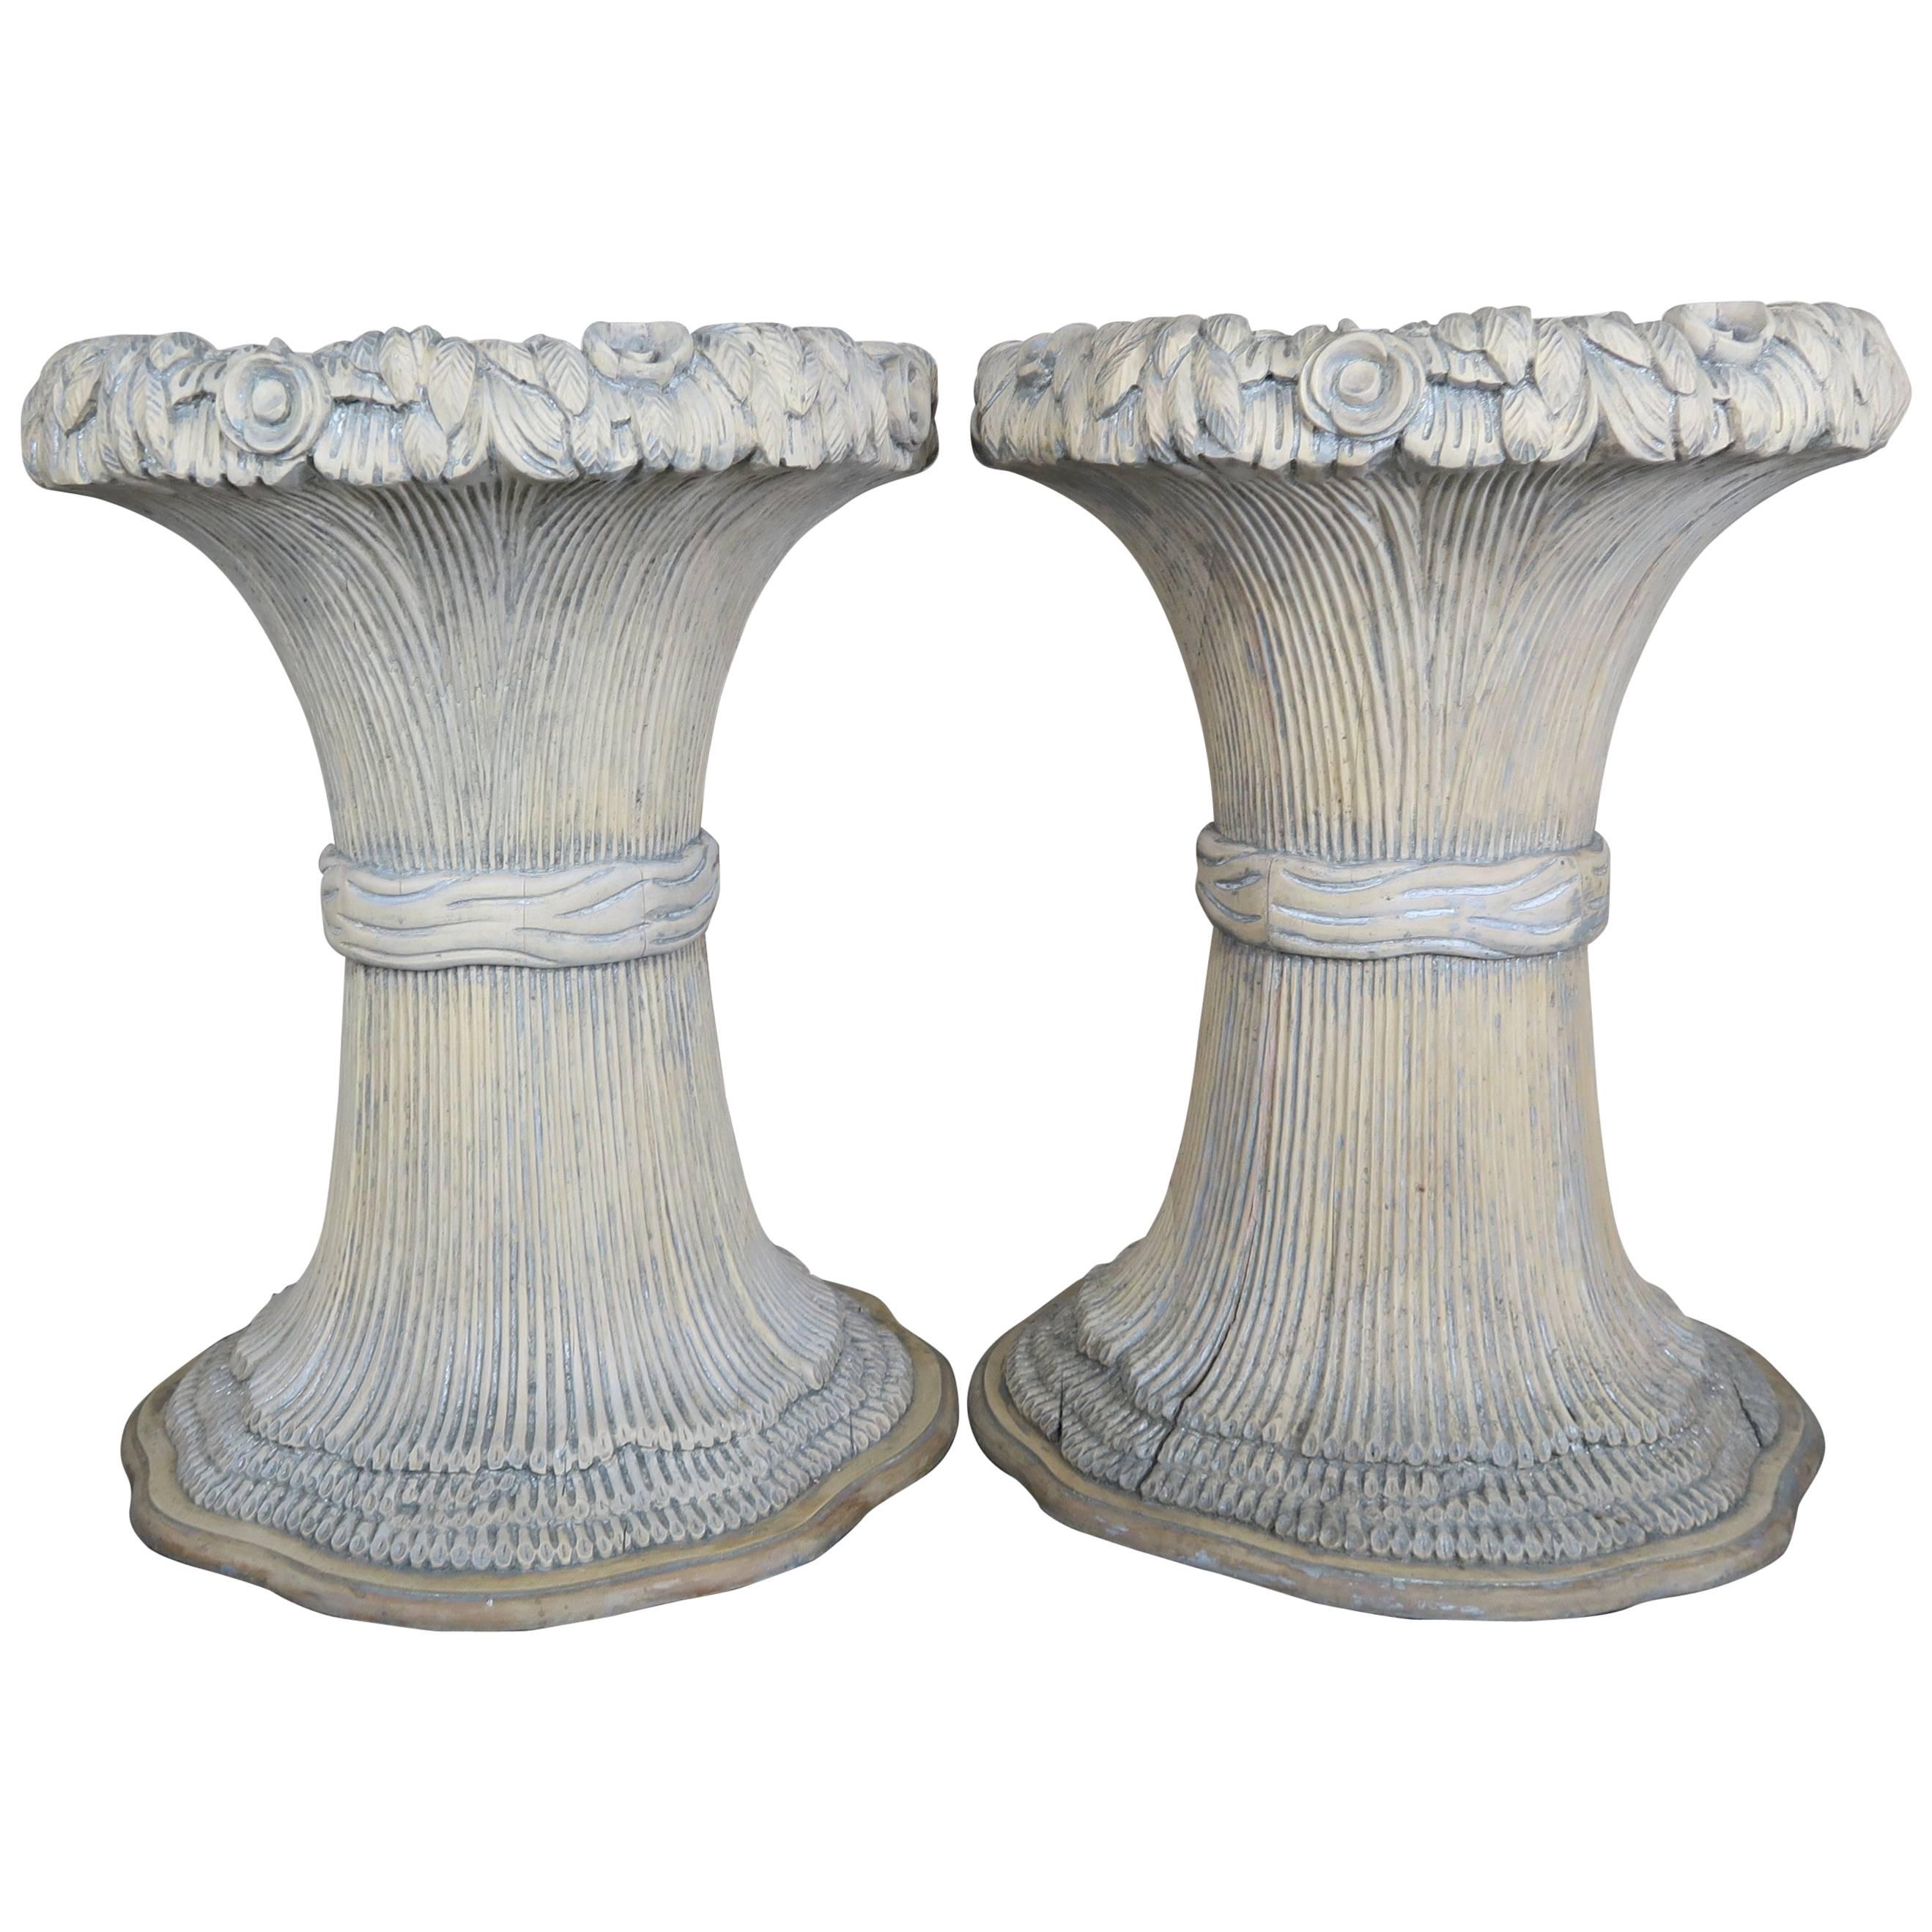 Carved Wood Harvest Wheat Planters, Pair